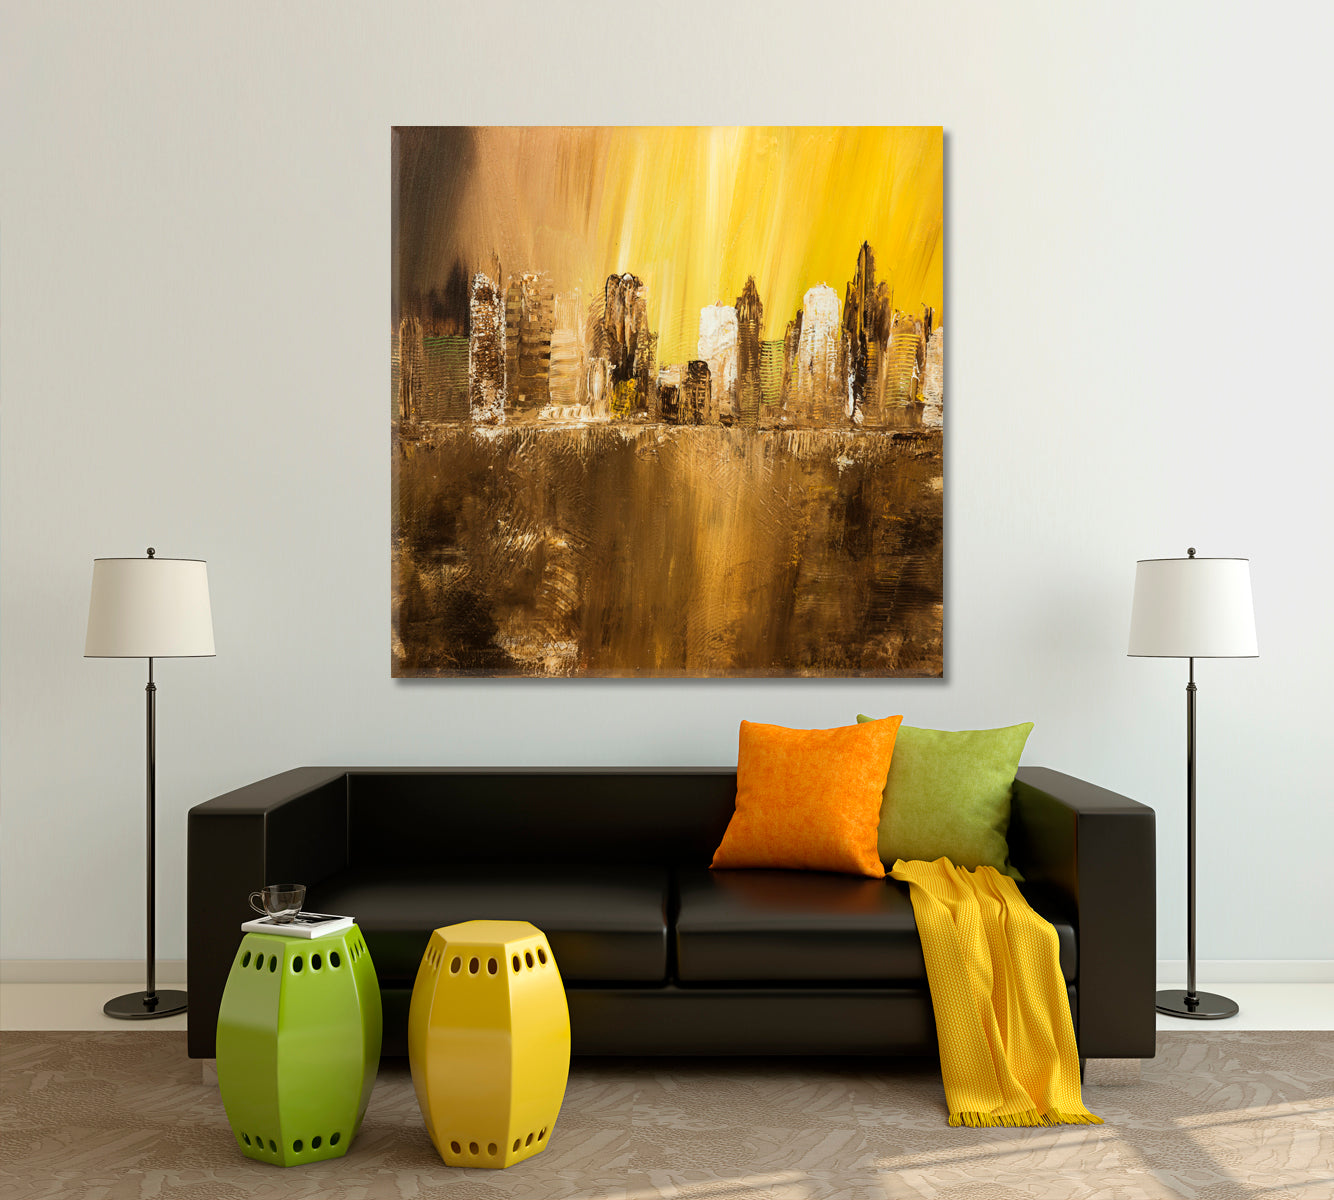 Abstract City Creative Modern Grunge Contemporary | Square Panel Cities Wall Art Artesty 1 Panel 12"x12" 